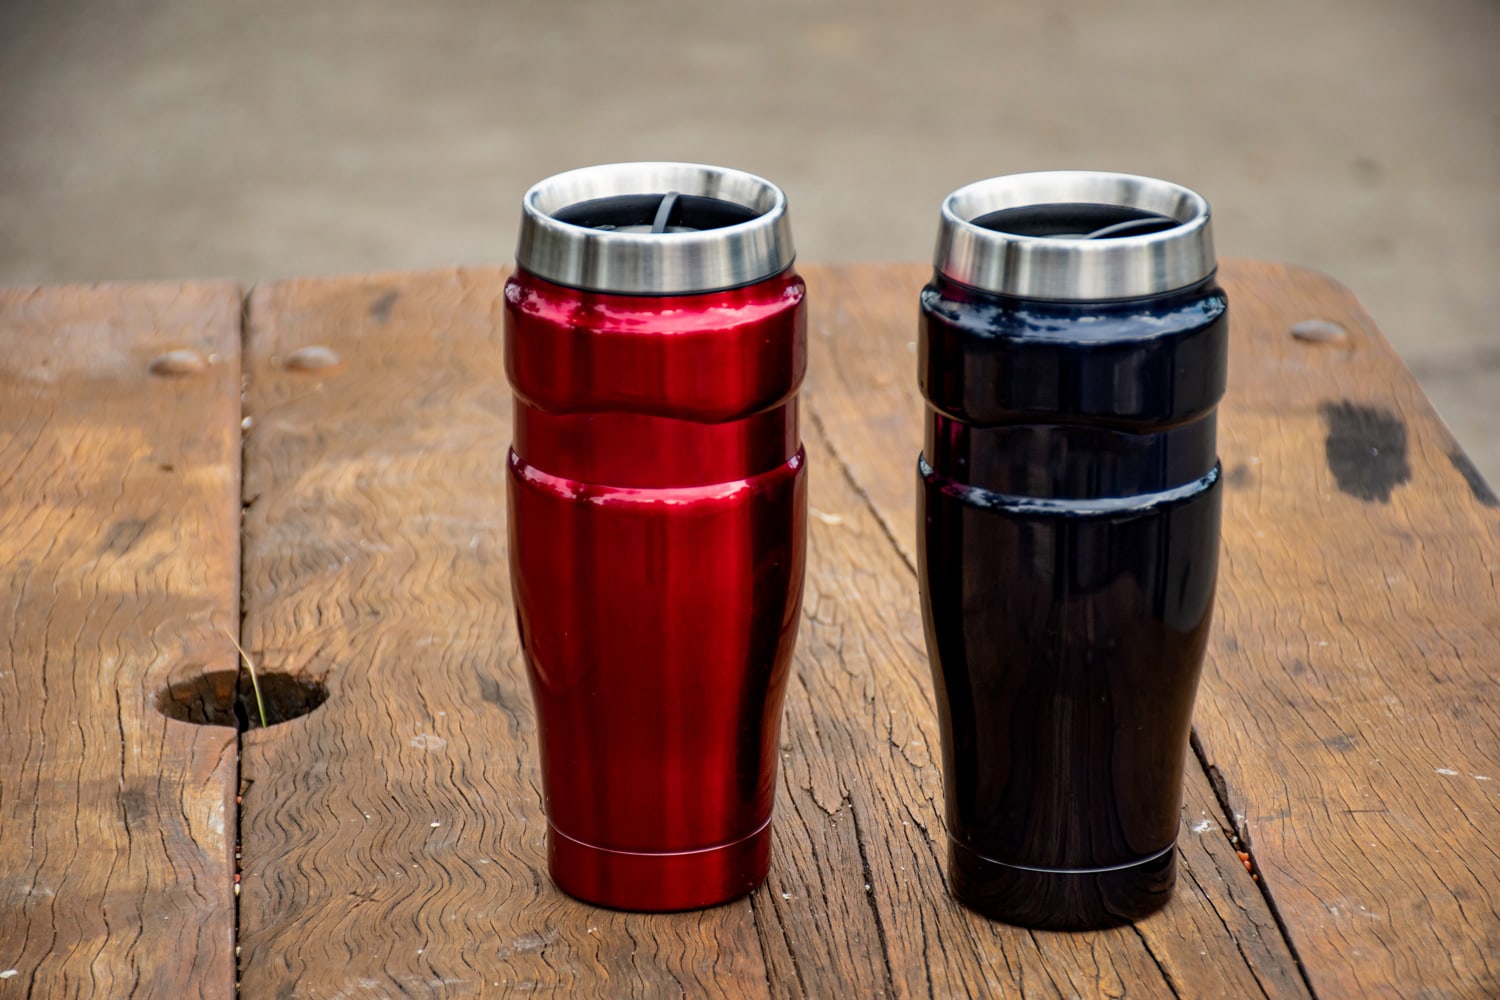 Insulated reusable stainless steel coffee travel tumbler mugs on the wooden table